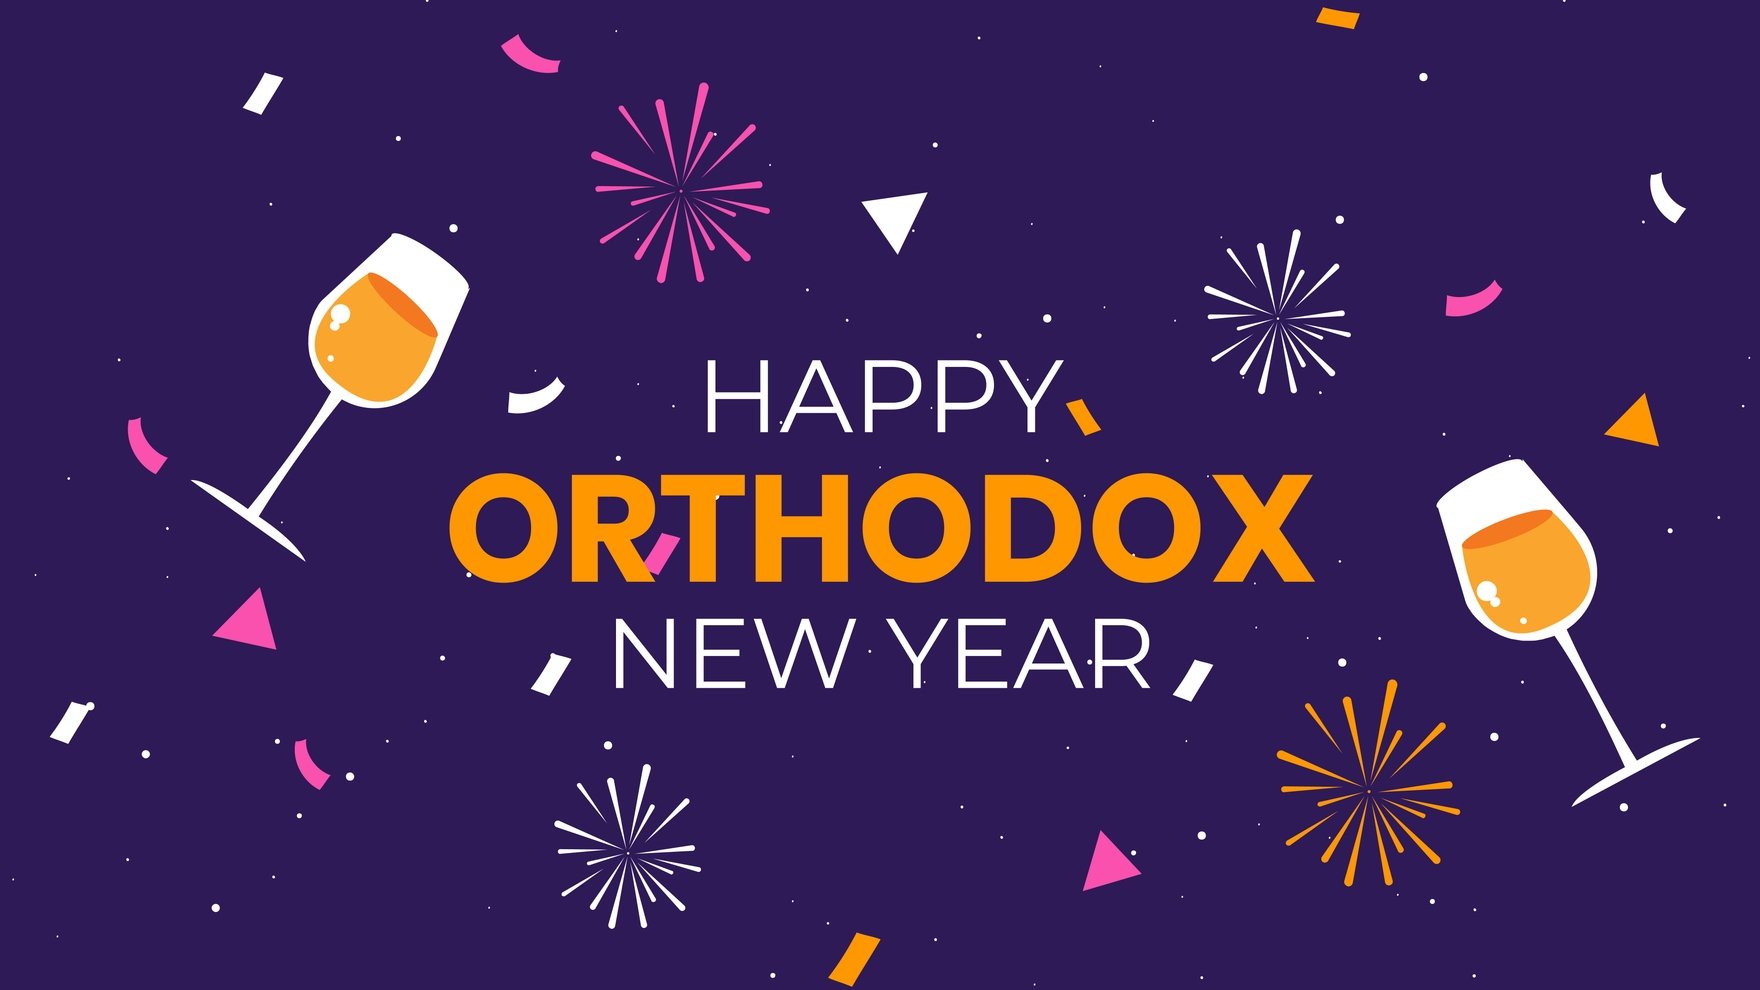 Free Orthodox New Year Vector Background in PDF, Illustrator, PSD, EPS, SVG, PNG, JPEG